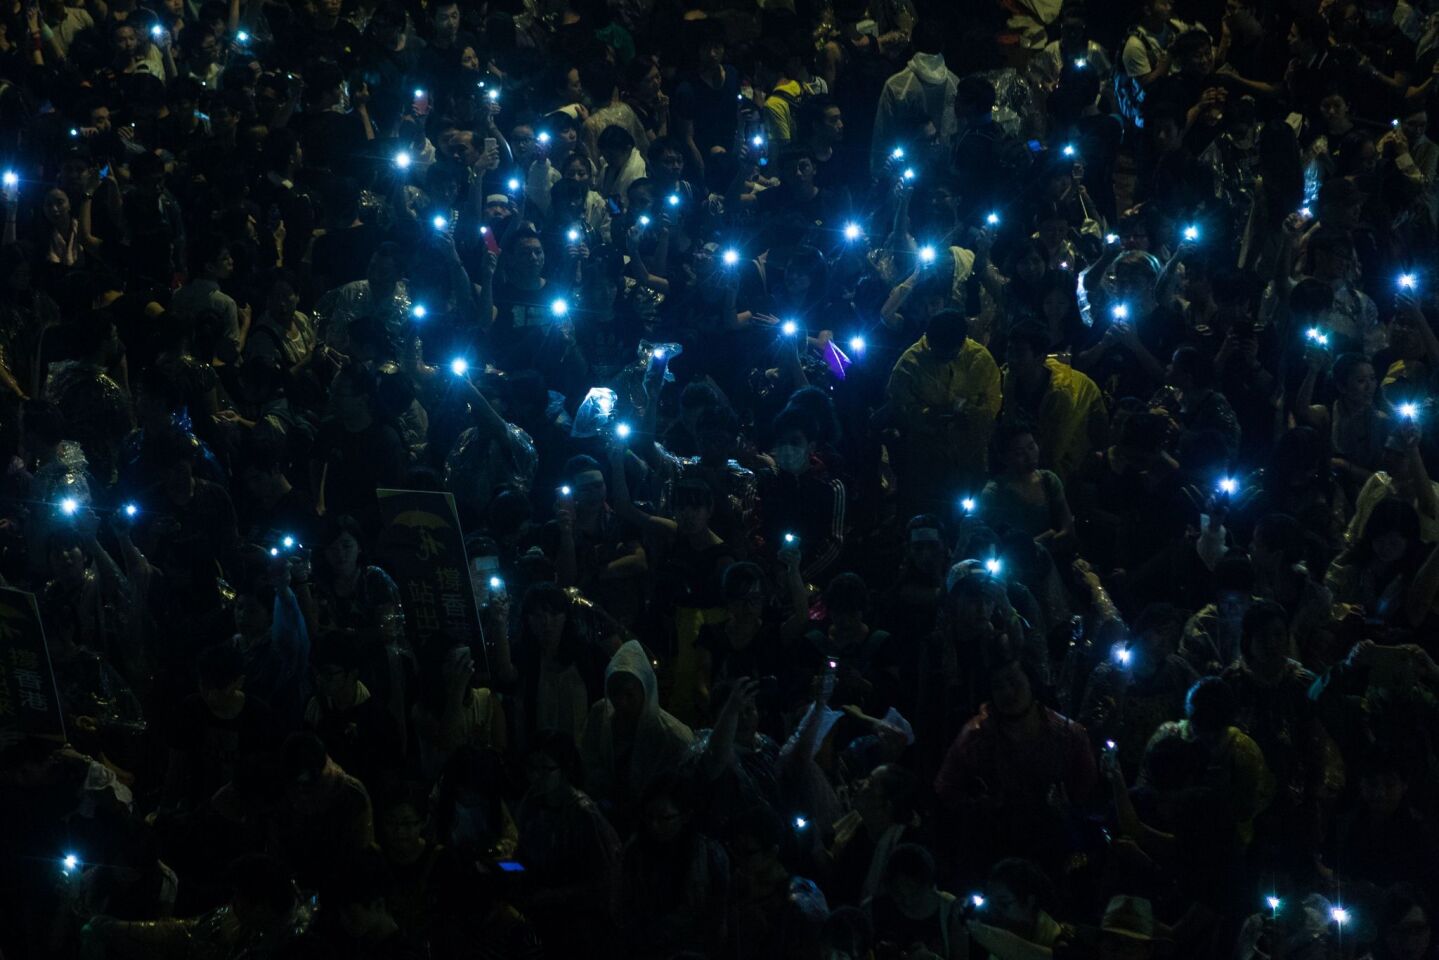 Pro-democracy protesters hold up their mobile phones after heavy rain in Hong Kong.